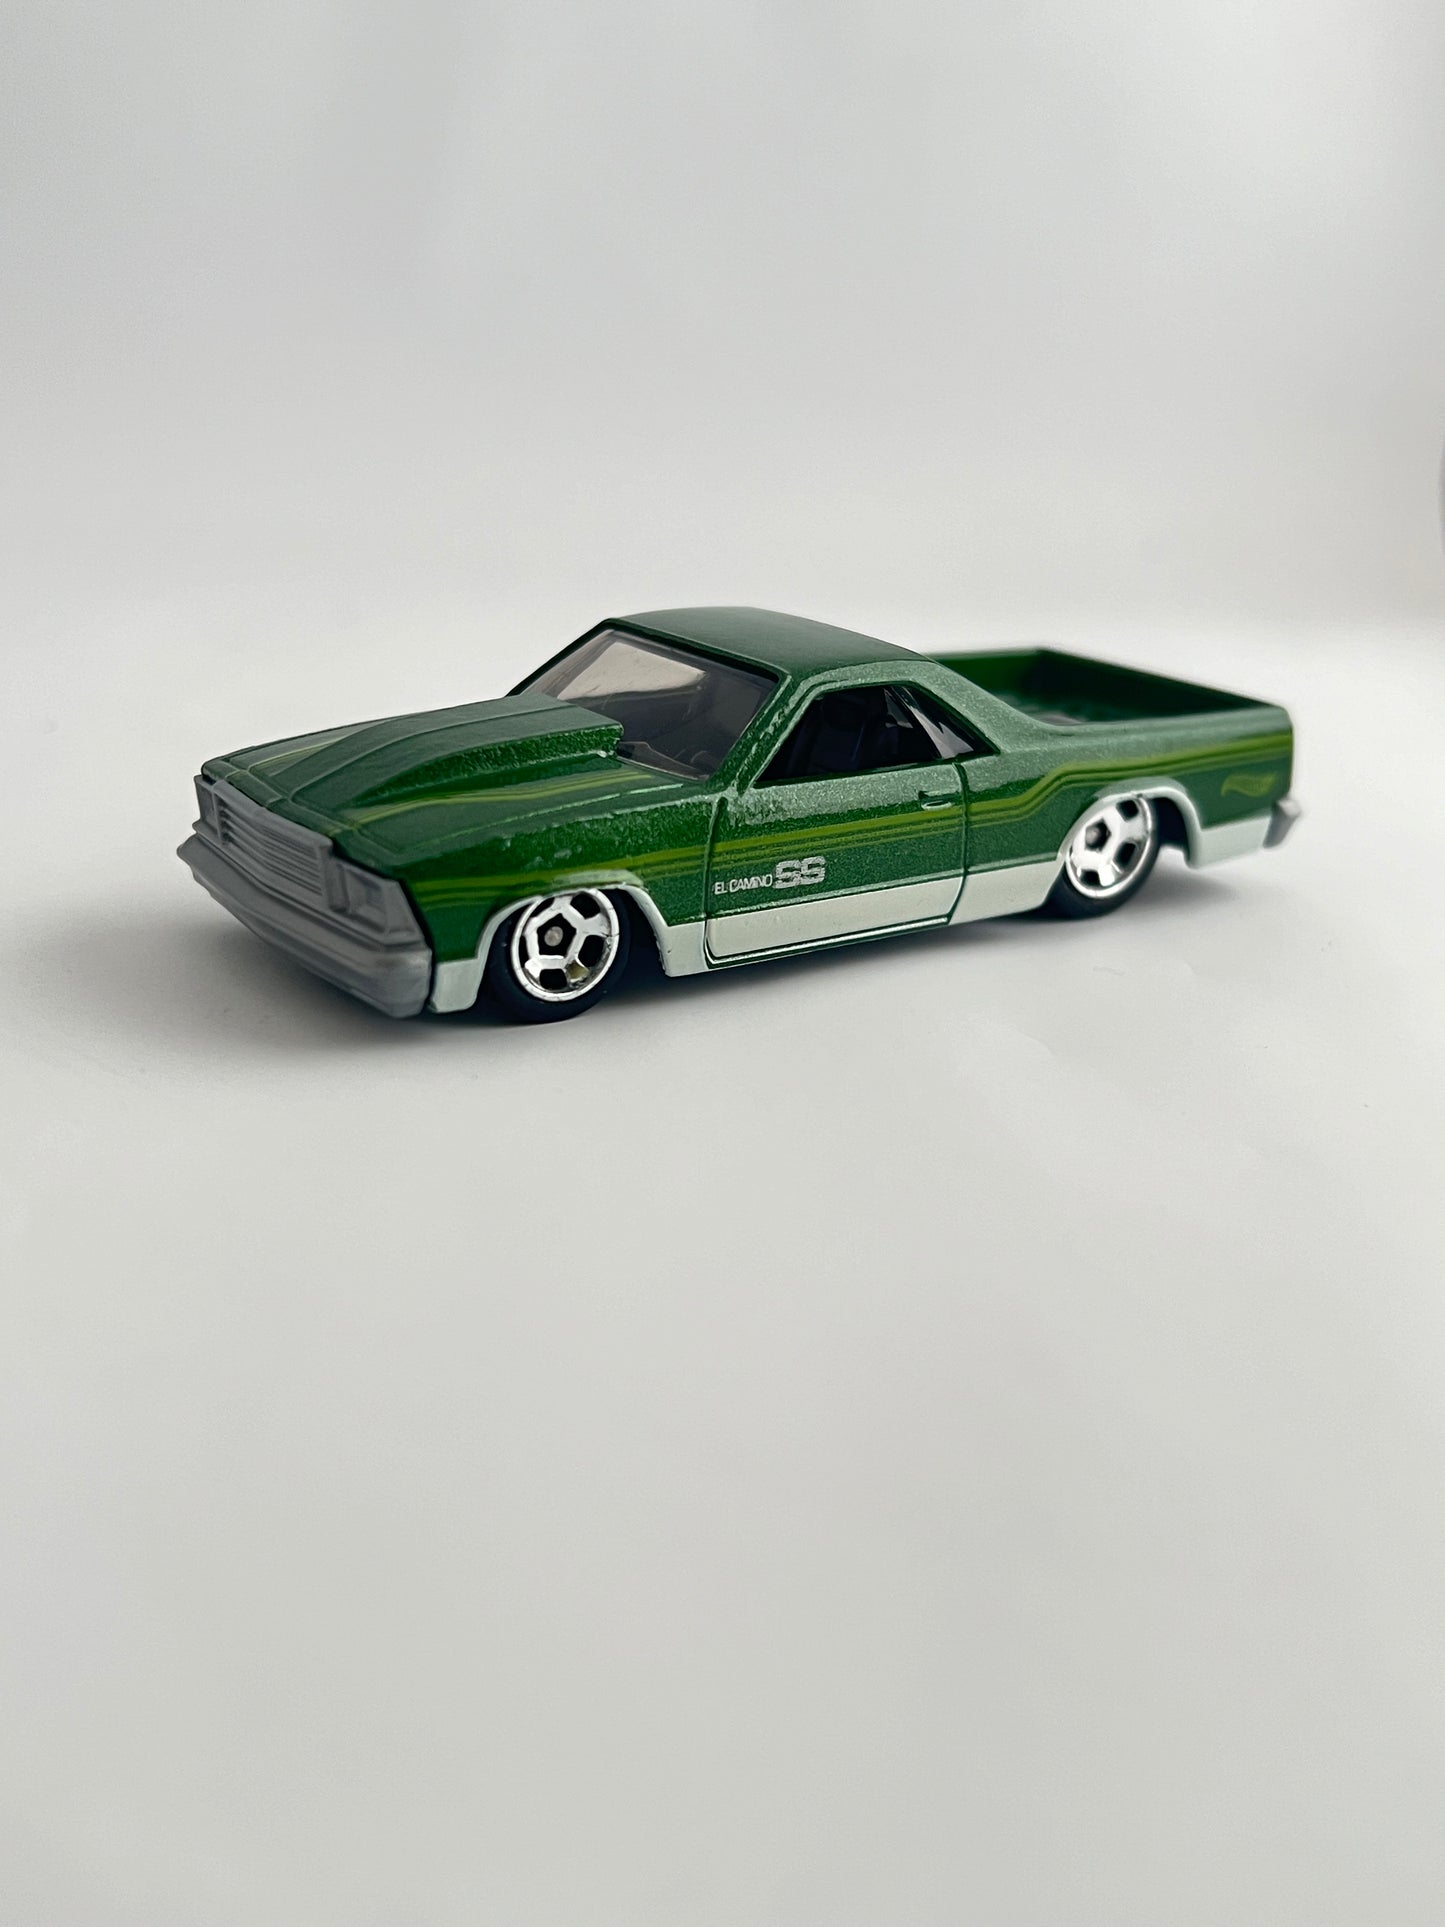 80 CHEVY EL CAMINO- UNCARDED - MINT CONDITION